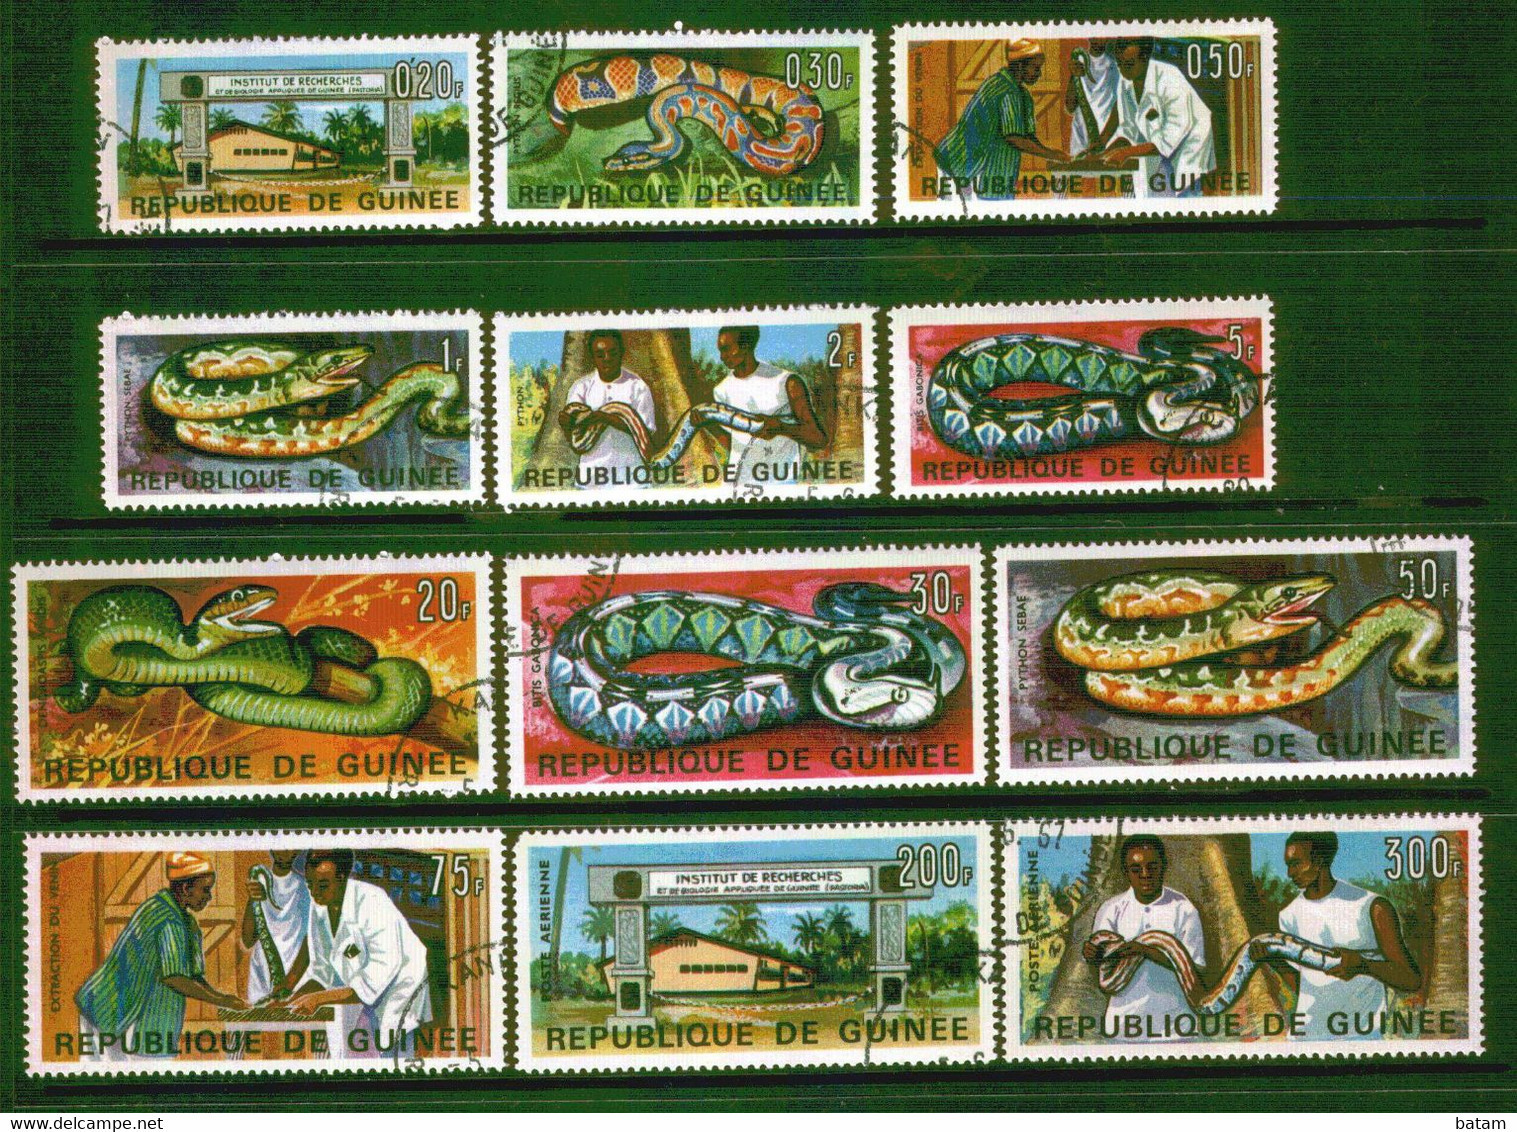 240 - Guinea 1967 - Snakes - Used Set - Serpents